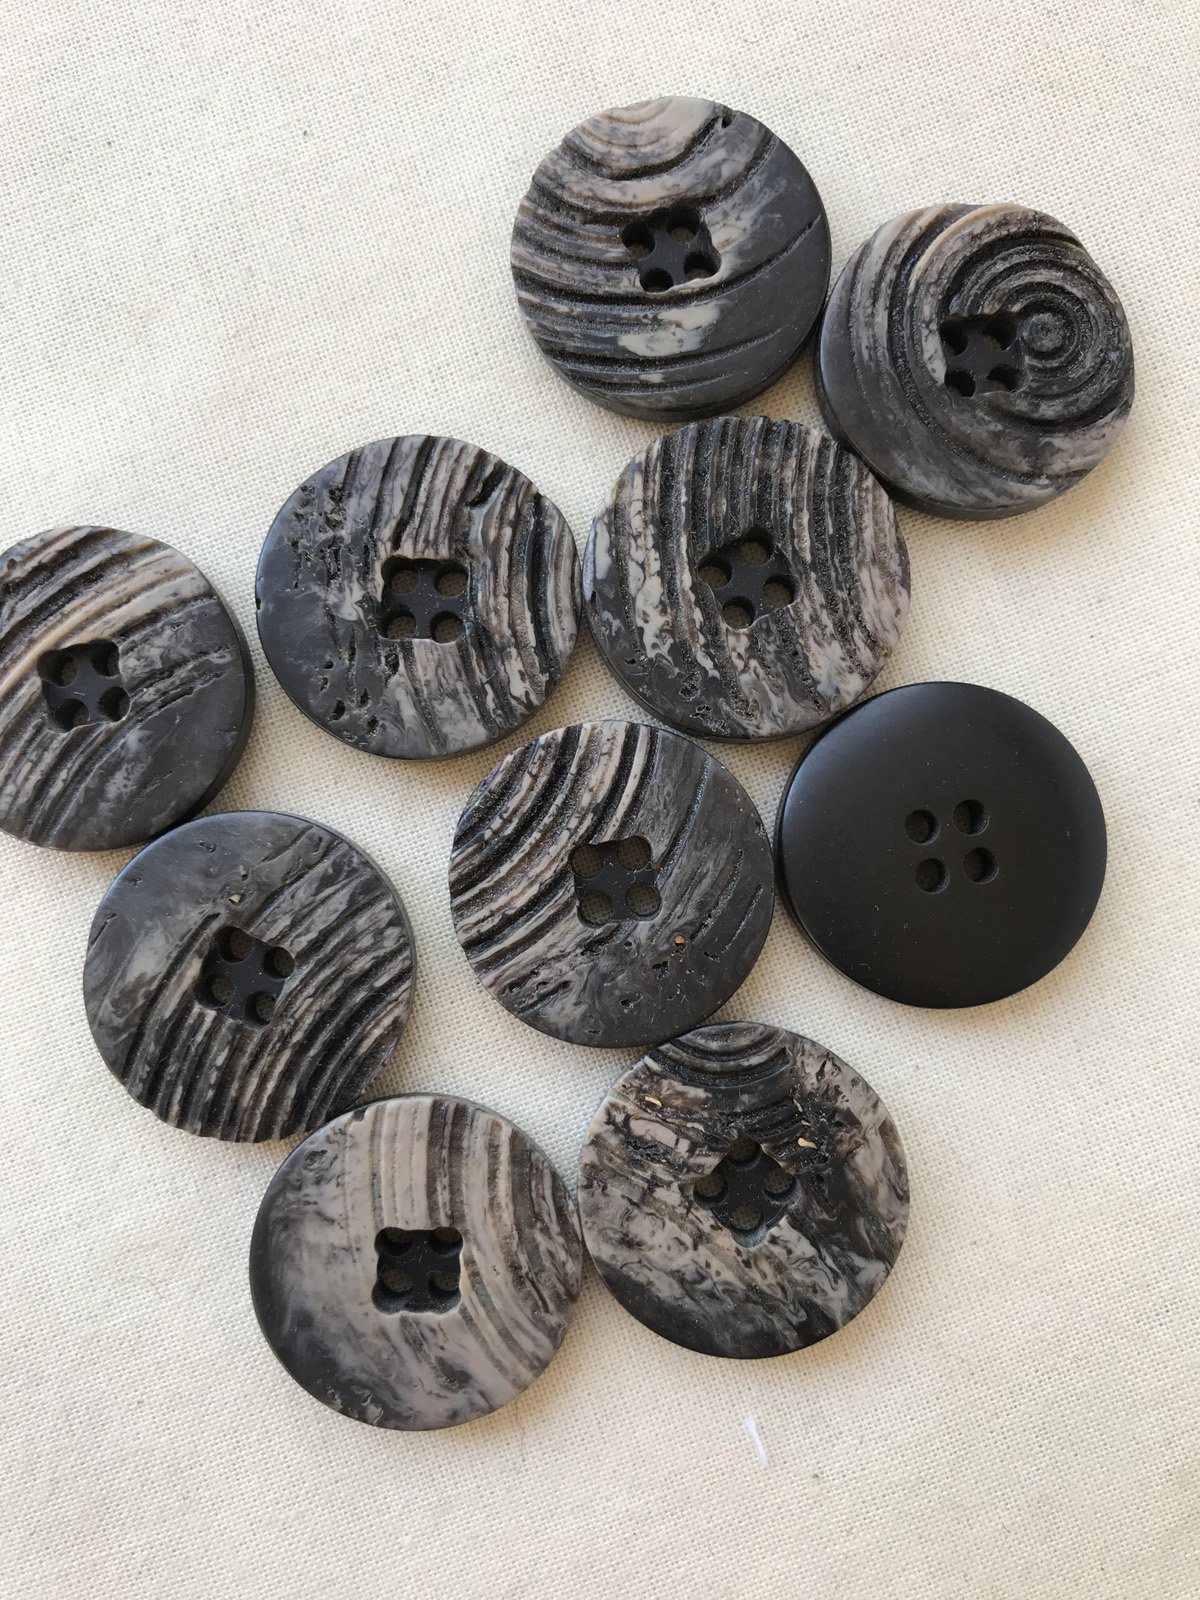 Designer Buttons Sourced from deadstock — L'Etoffe Fabrics Online